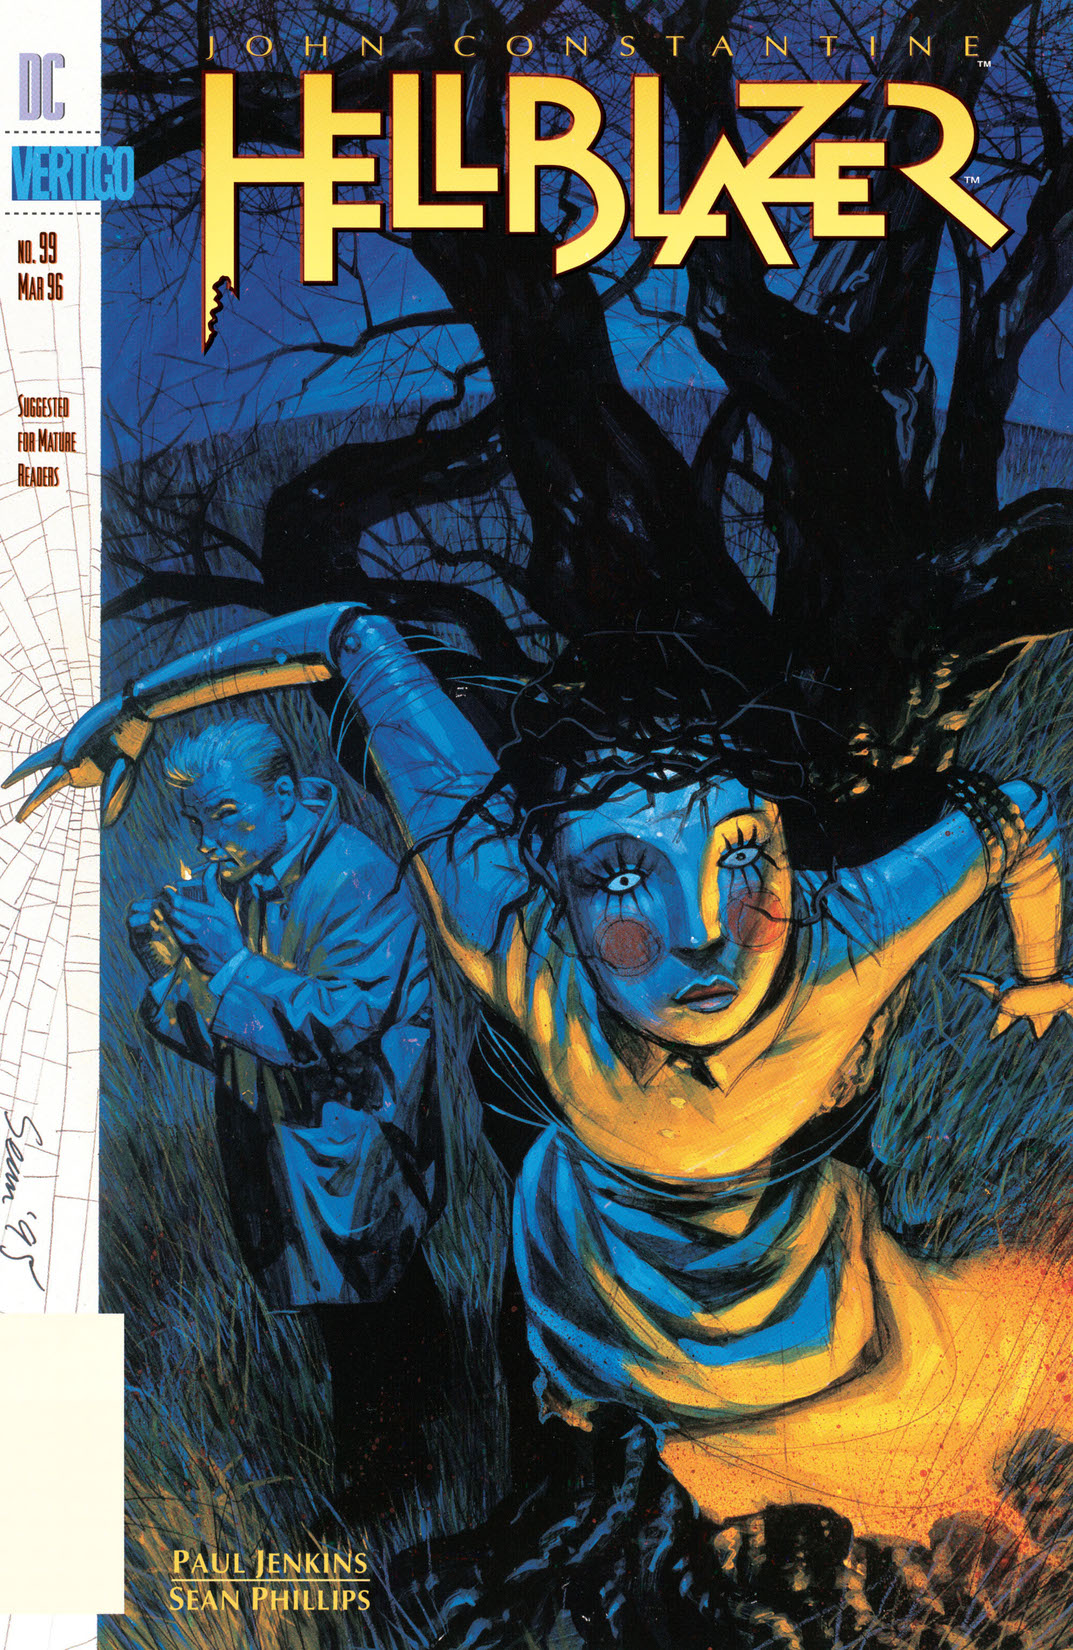 Hellblazer #99 preview images